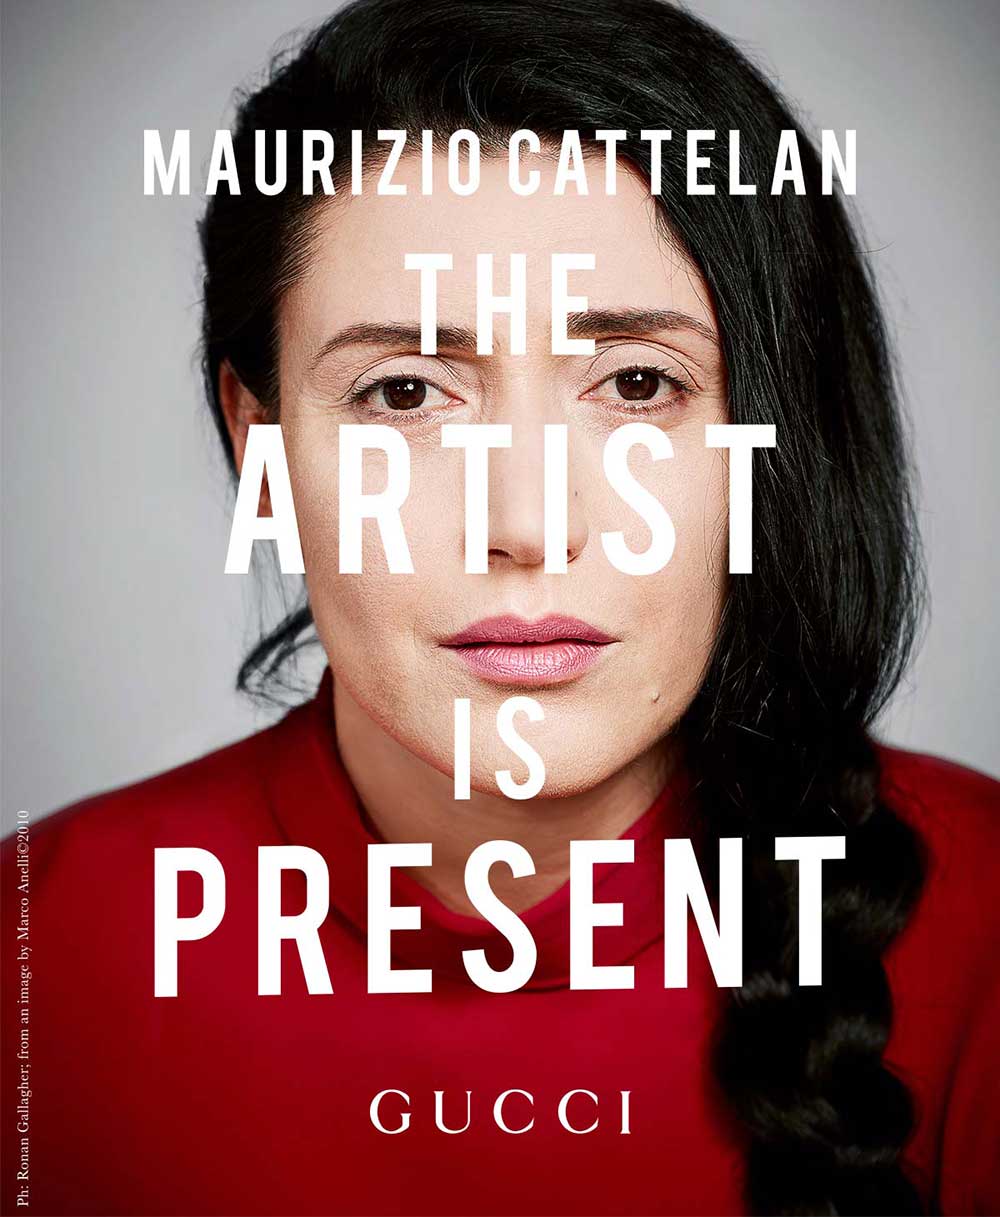 A reproduction of Marina Abramovic’s portrait as it appears in Gucci’s version of “The Artist Is Present” I Photo courtesy of Ronan Gallagher, inspired by the original taken by Marco Anelli